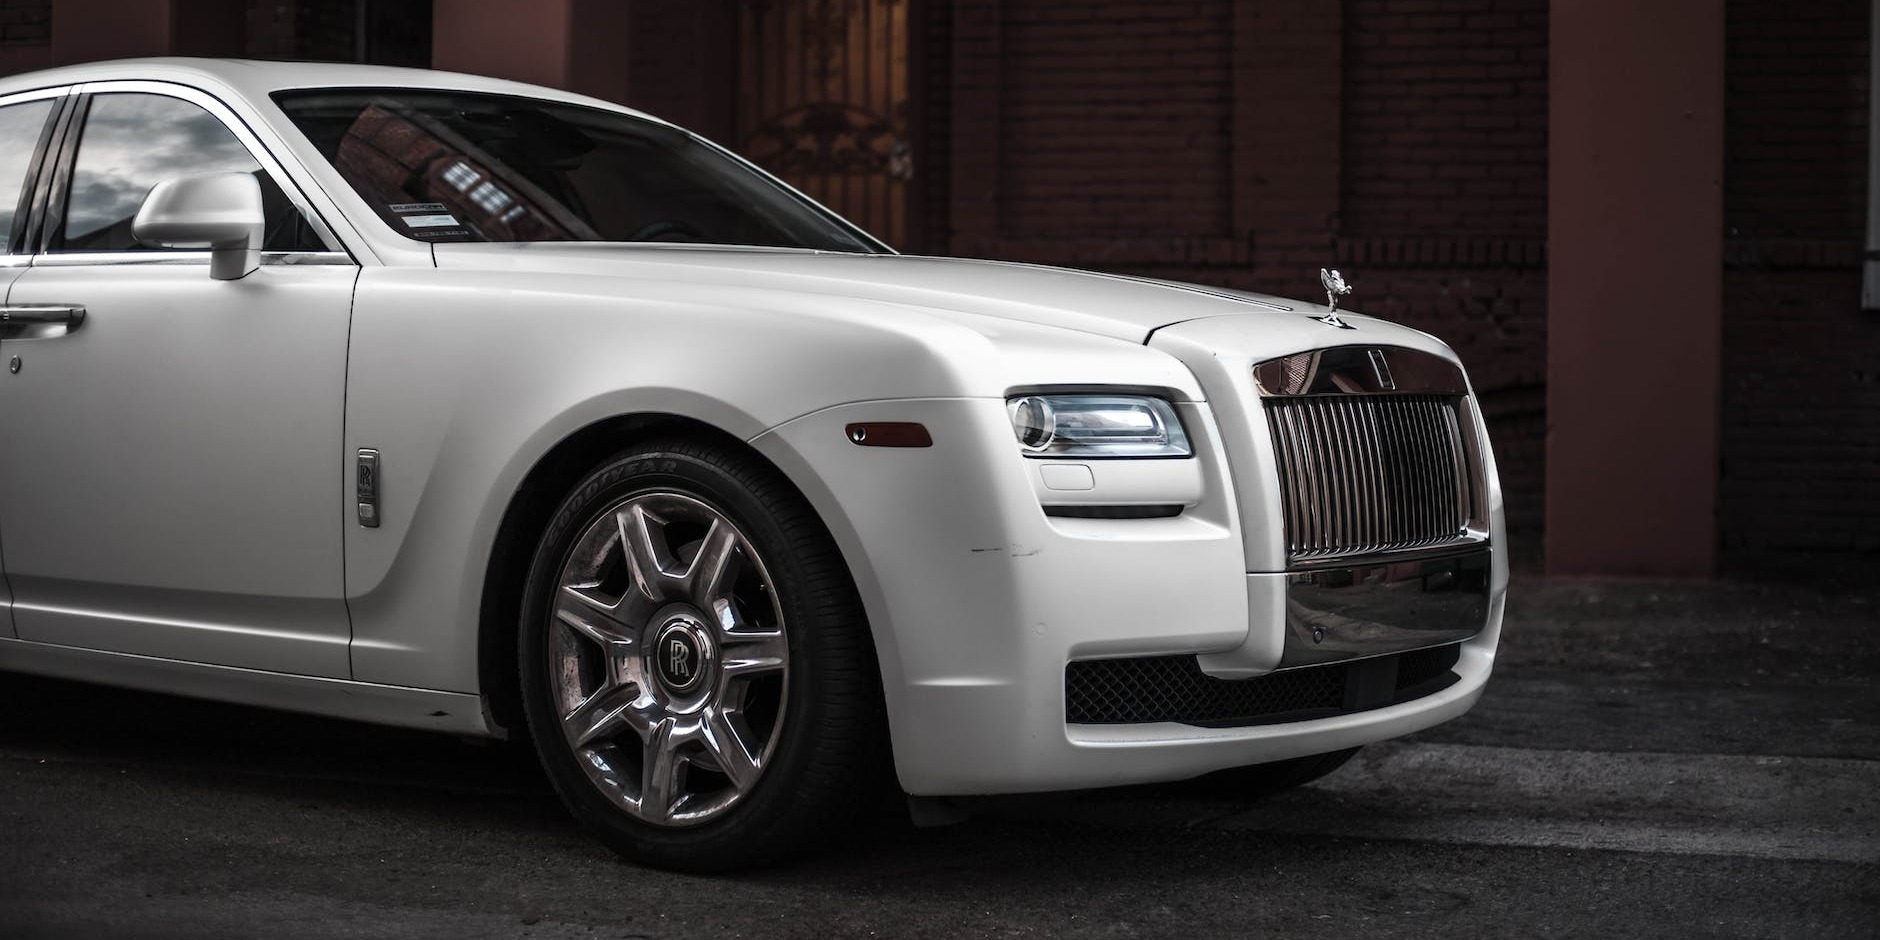 Exploring Strathclyde in Style: Why the Rolls Royce Ghost is Your Premier Choice